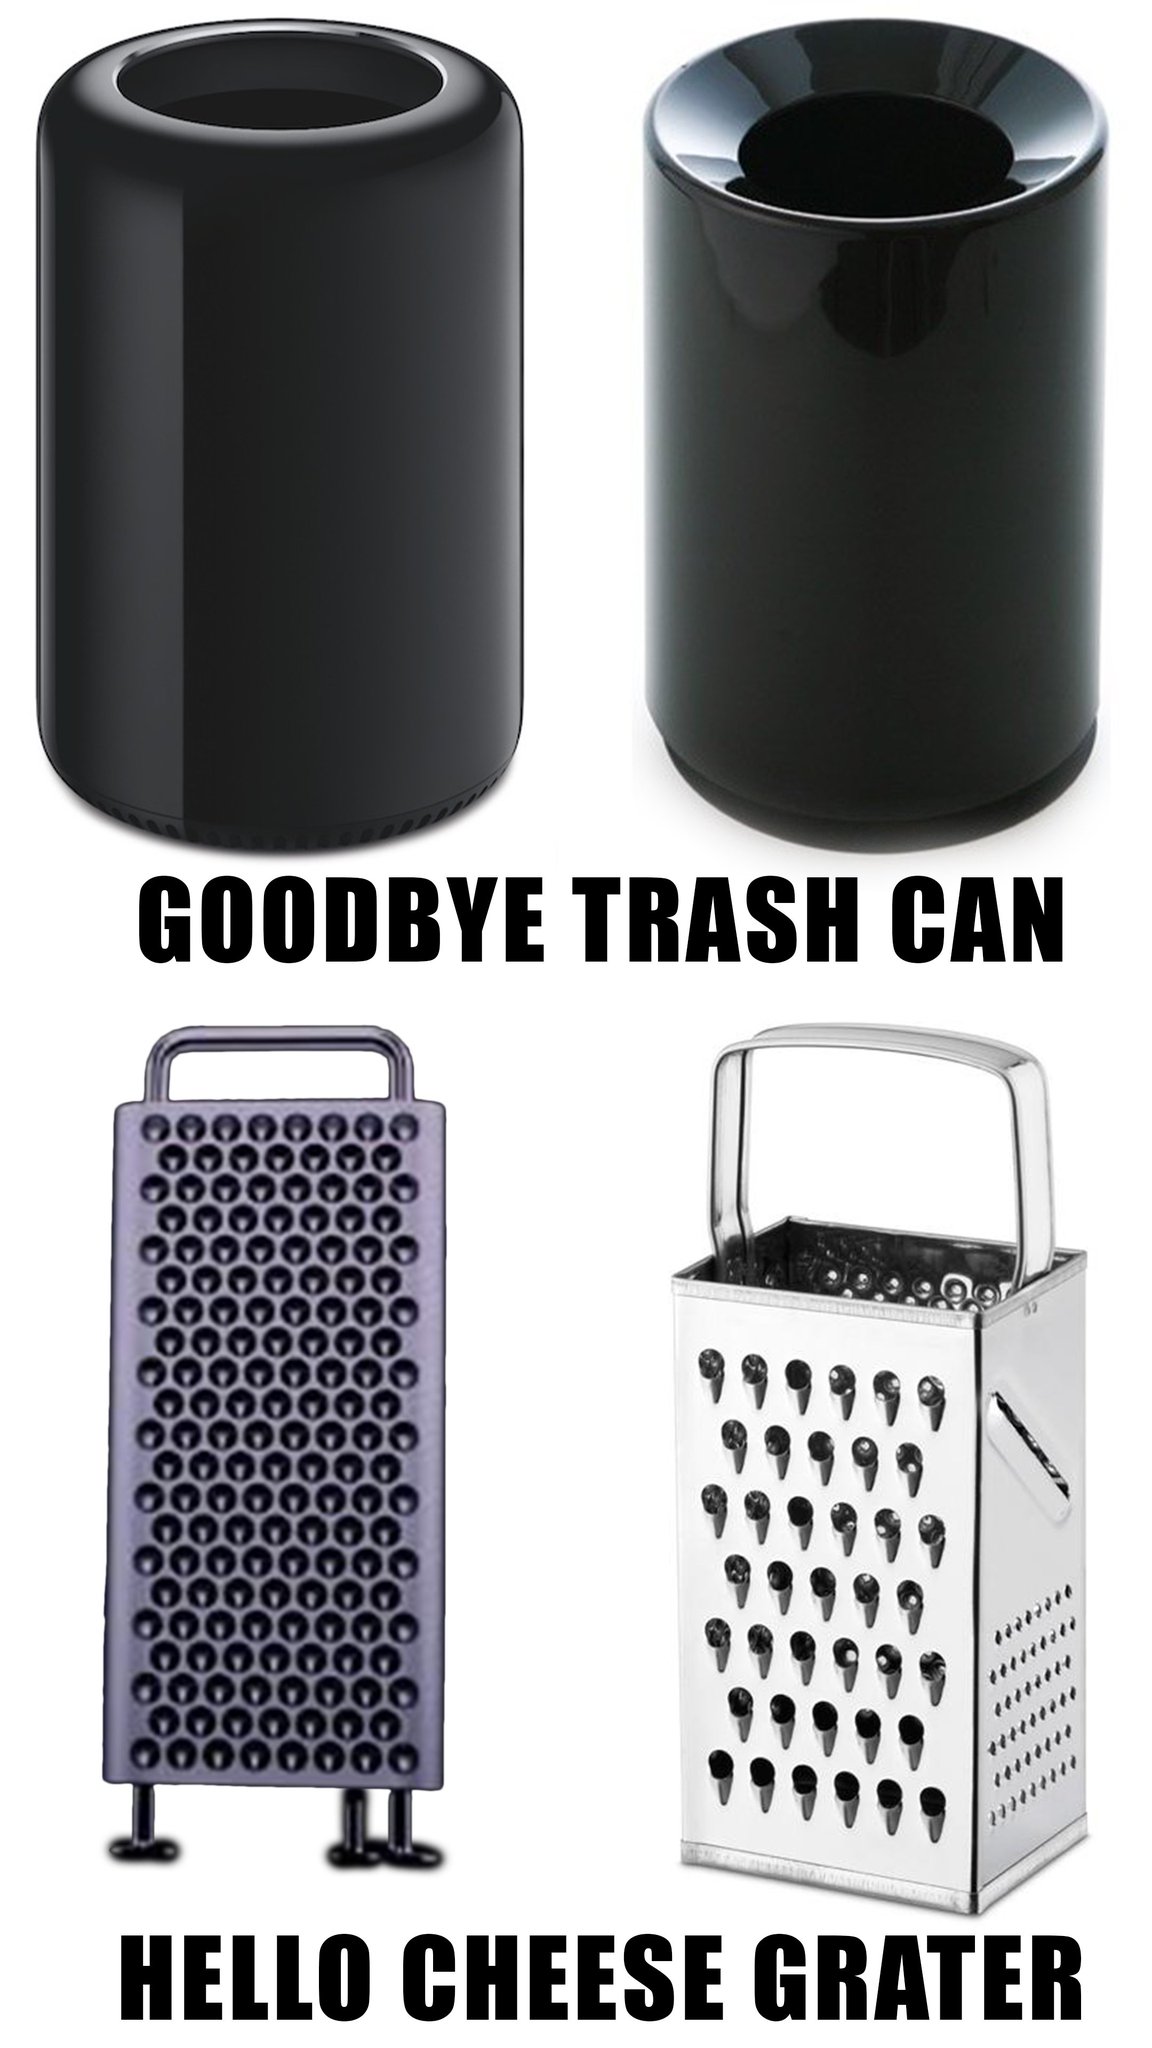 Mac Pro Cheese Grater memes - me too - Hello Cheese Grater Goodbye Trash Can